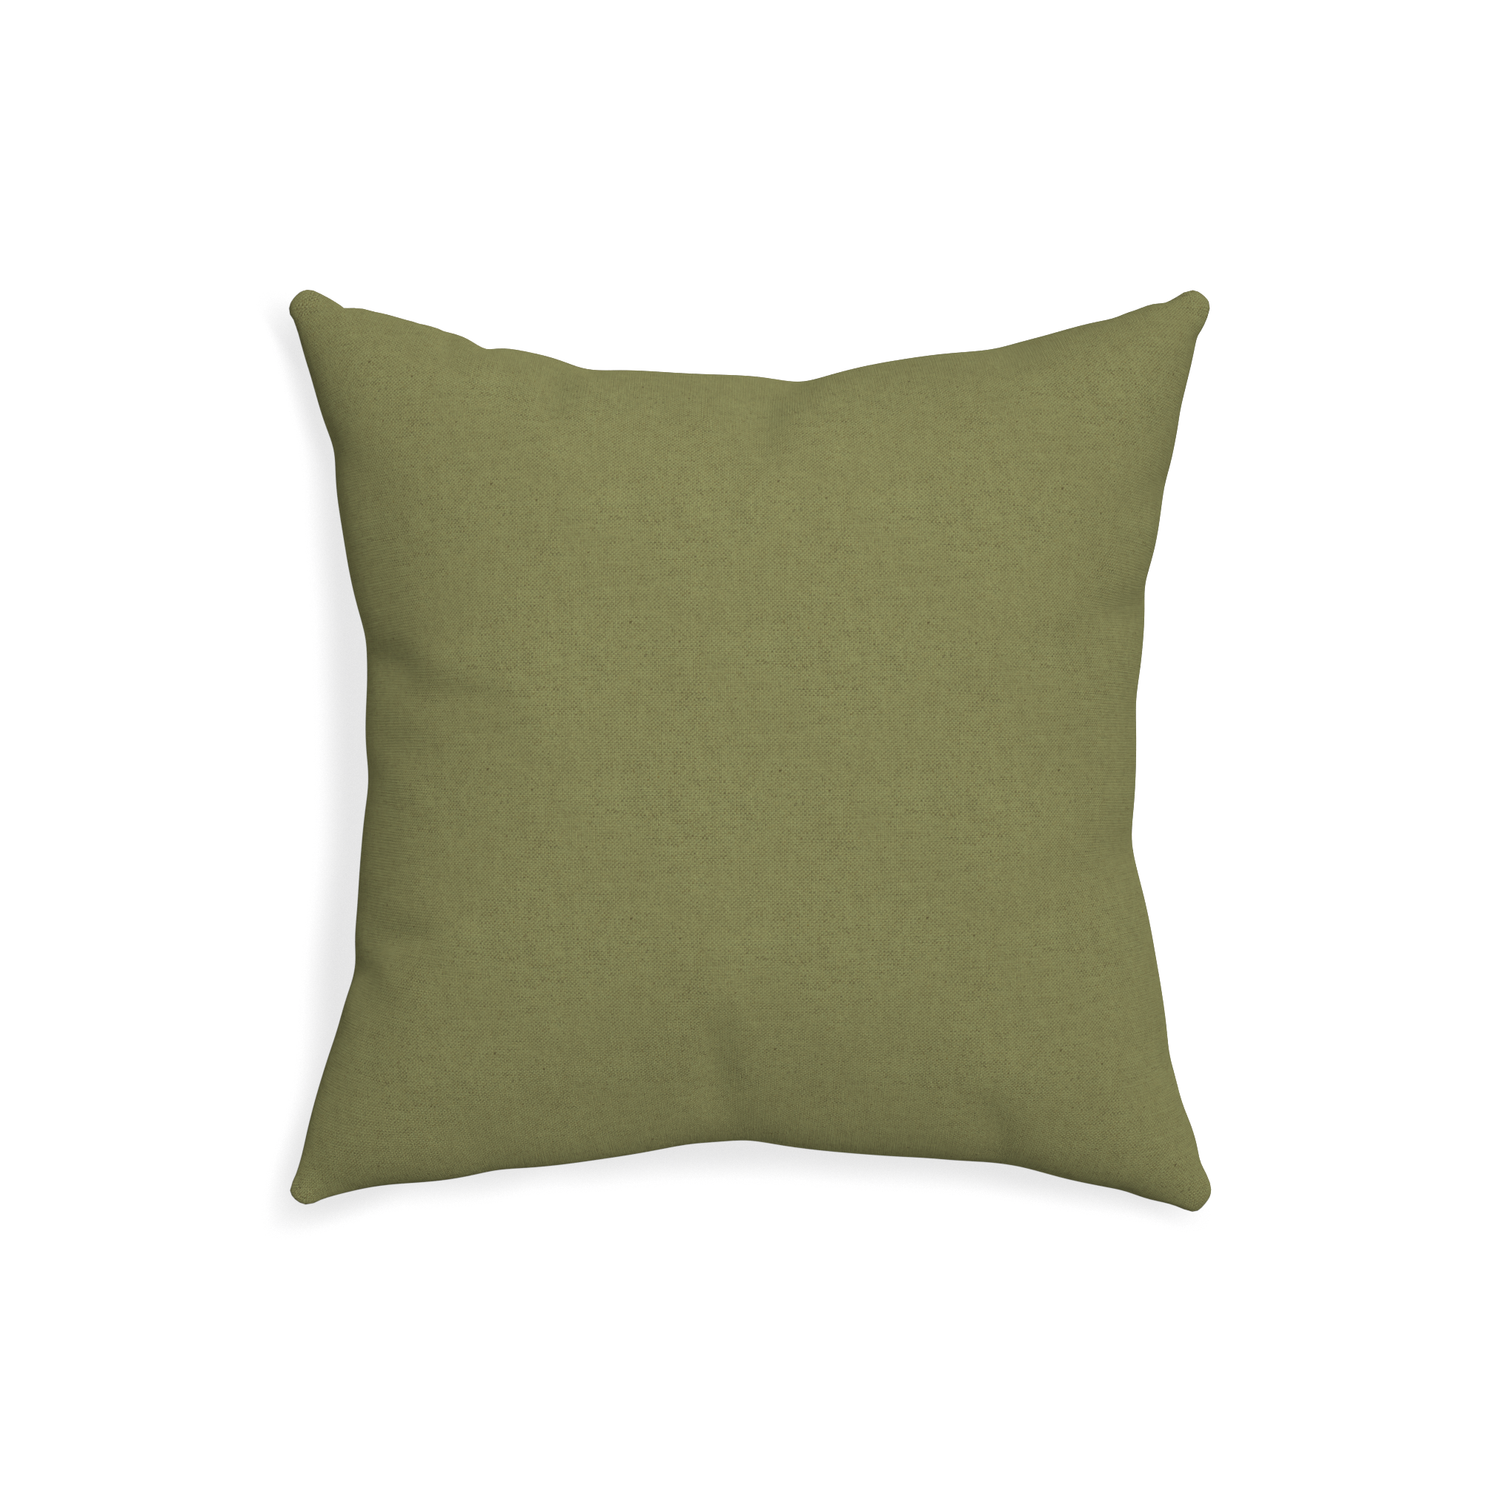 20-square moss custom moss greenpillow with none on white background